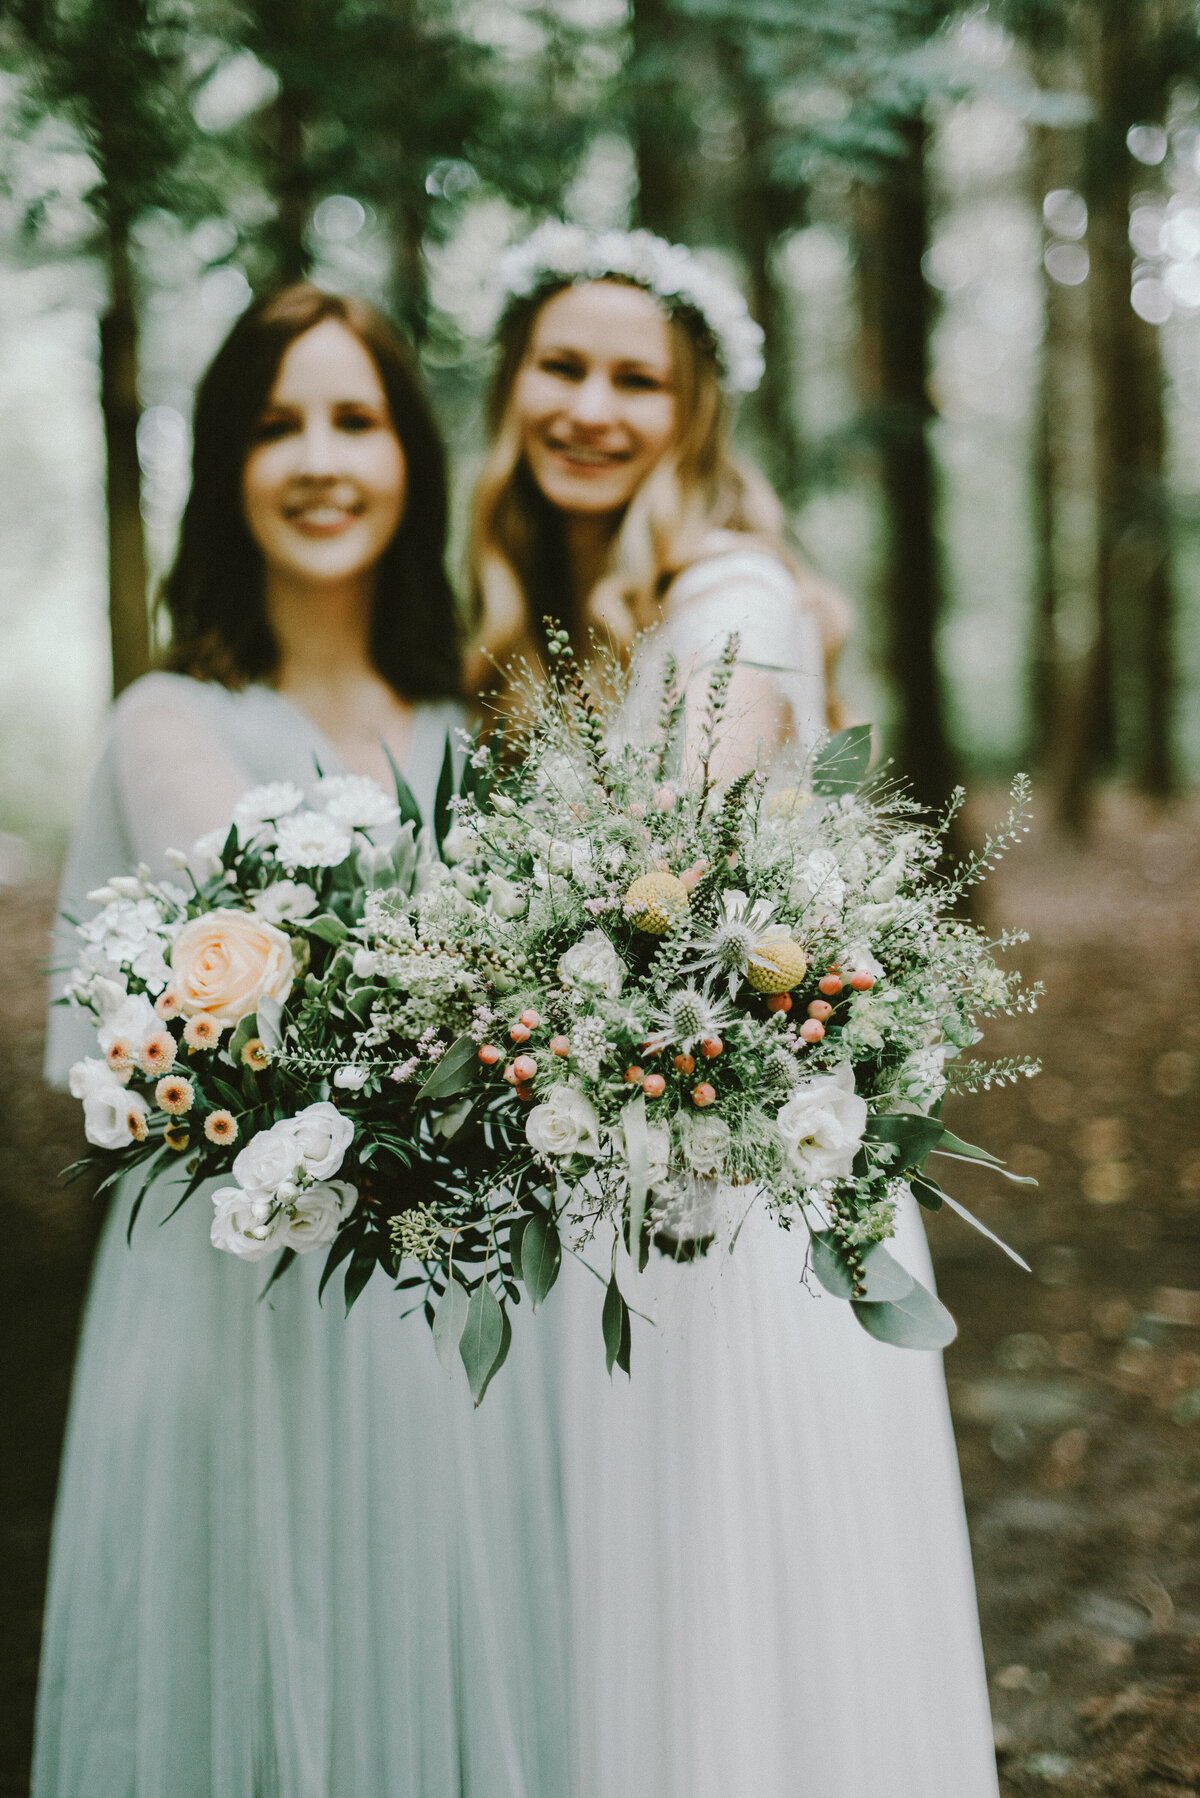 Two brides with their bridal bouquets enjoying their microwedding abroad